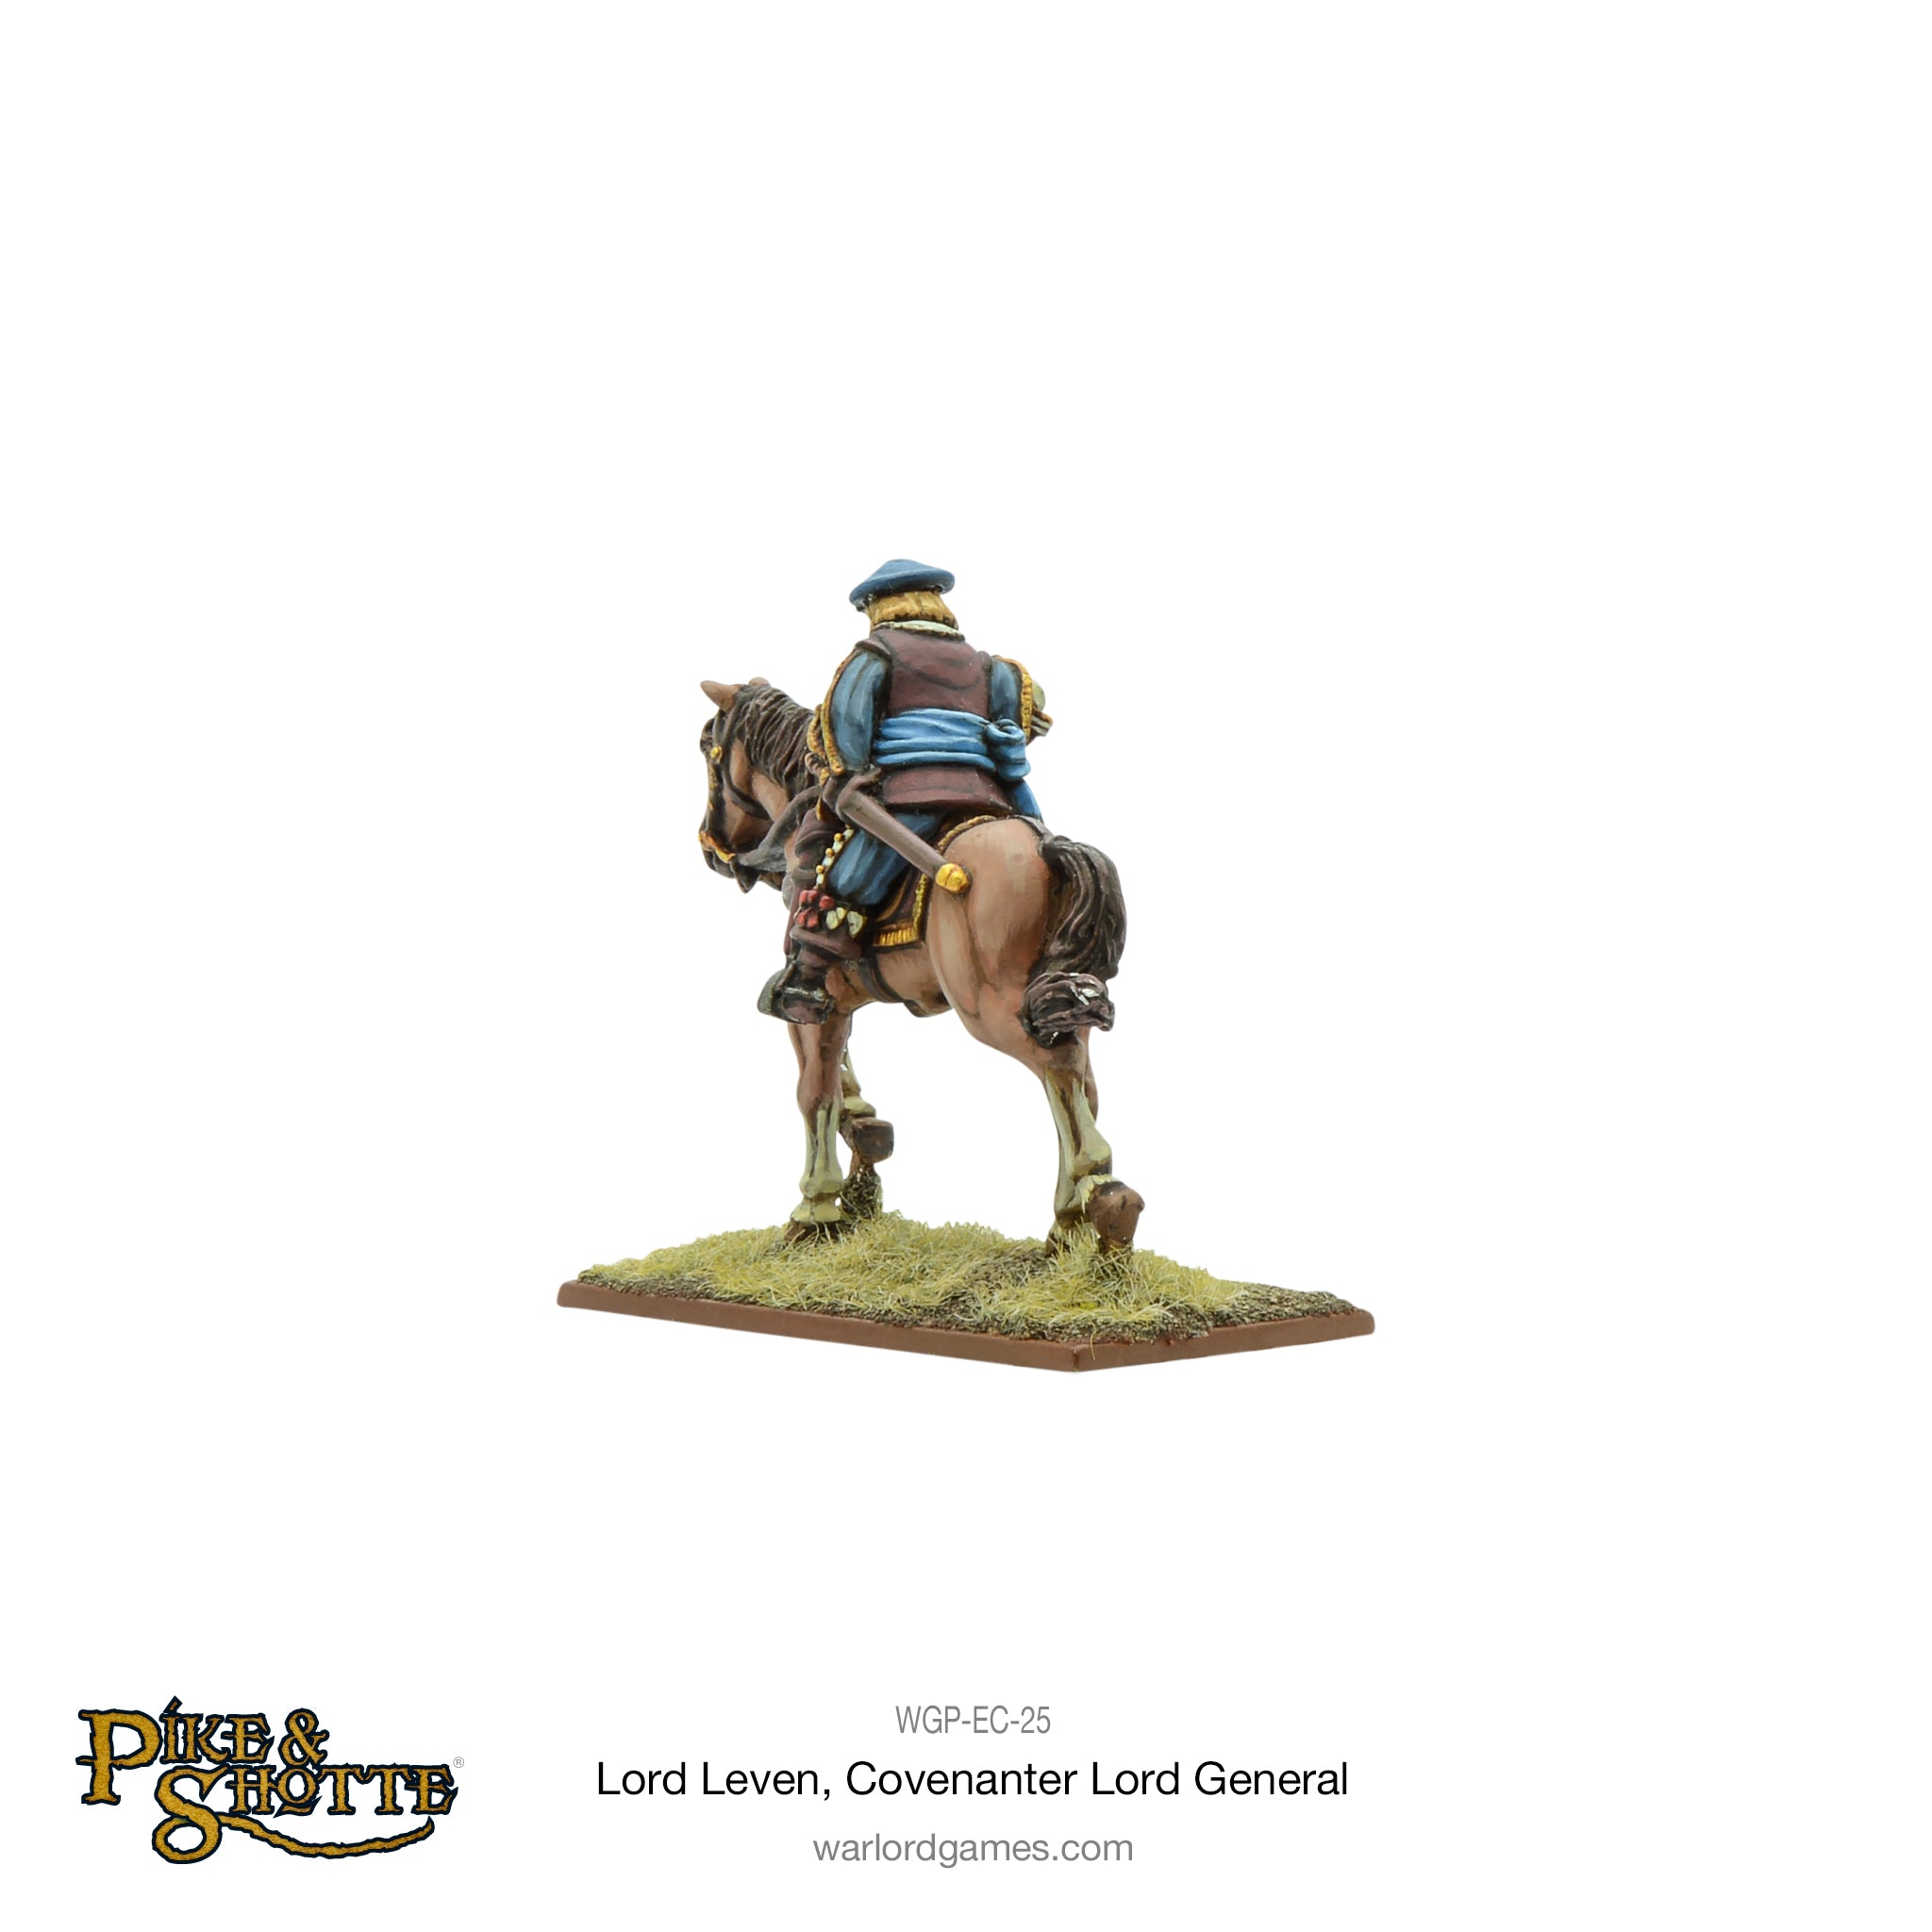 Lord Leven, Covenanter Lord General